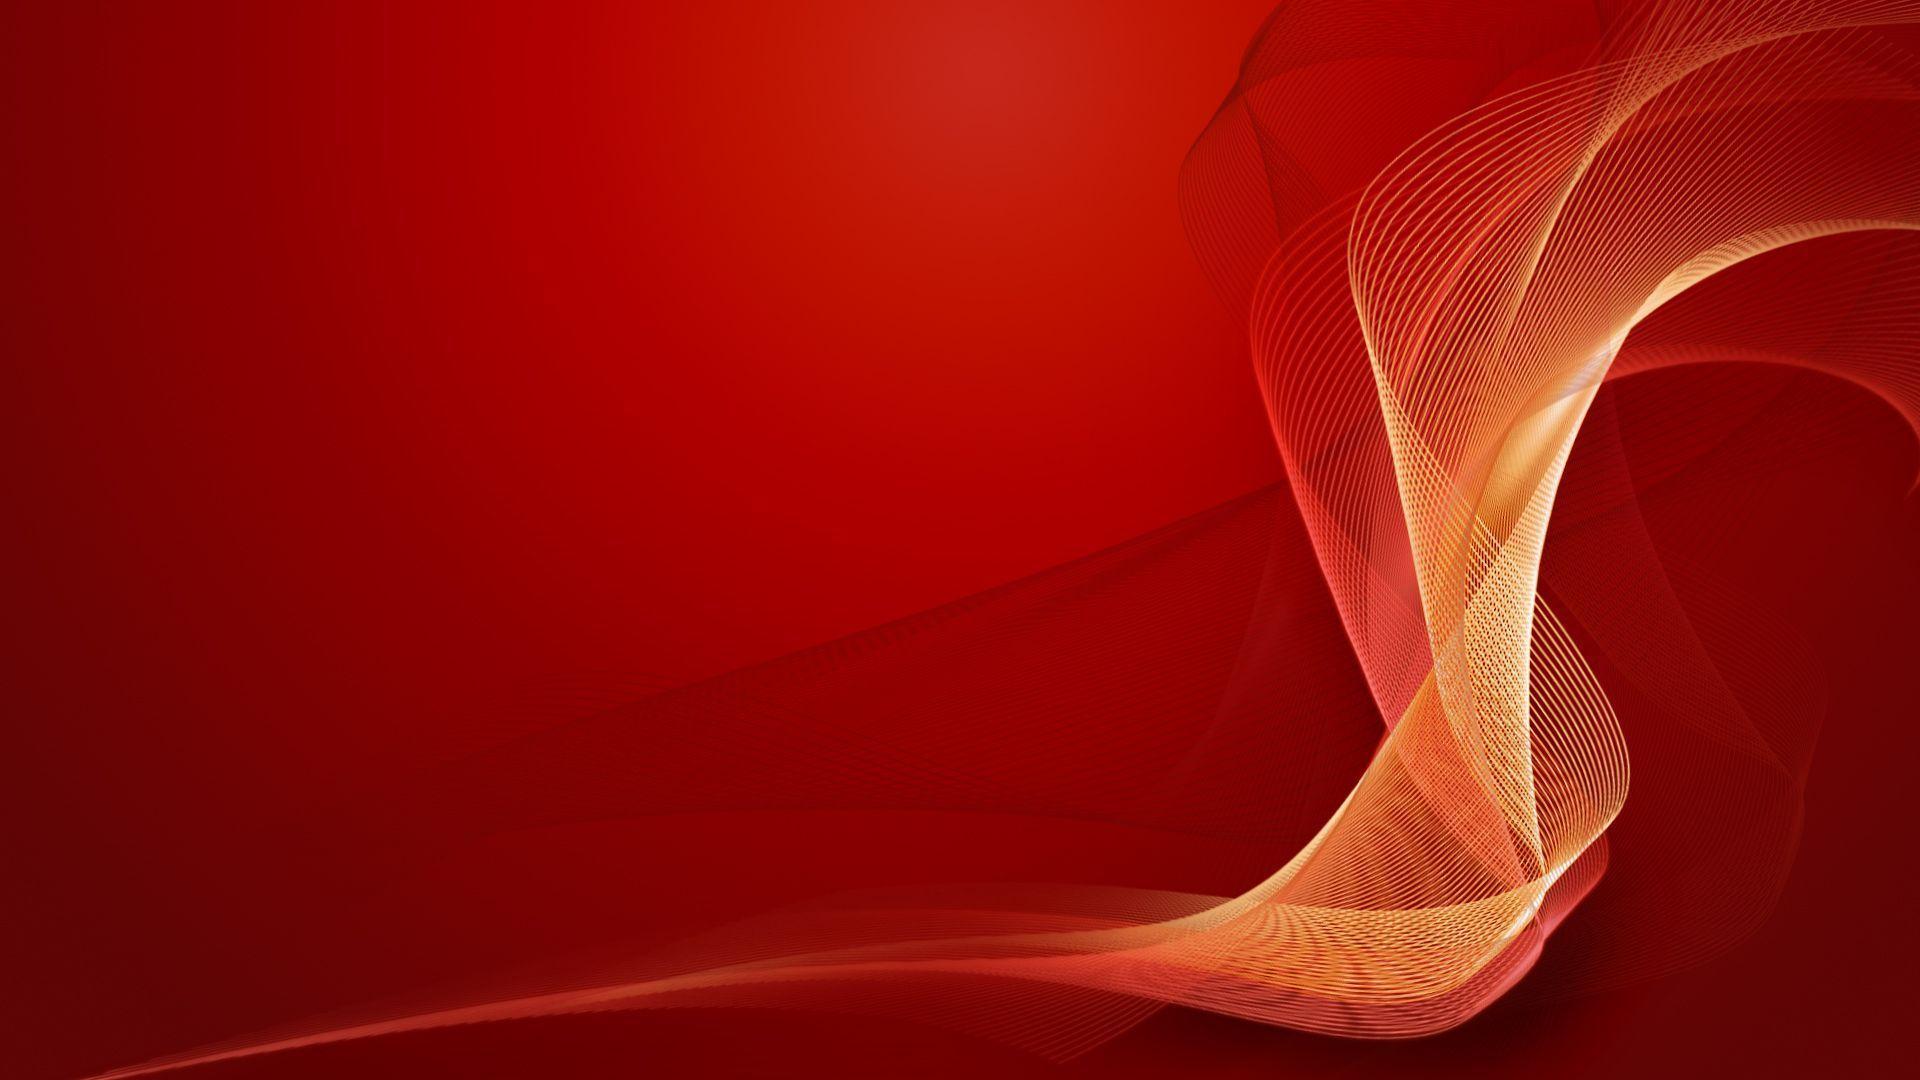 Wallpaper For > Red Abstract Background